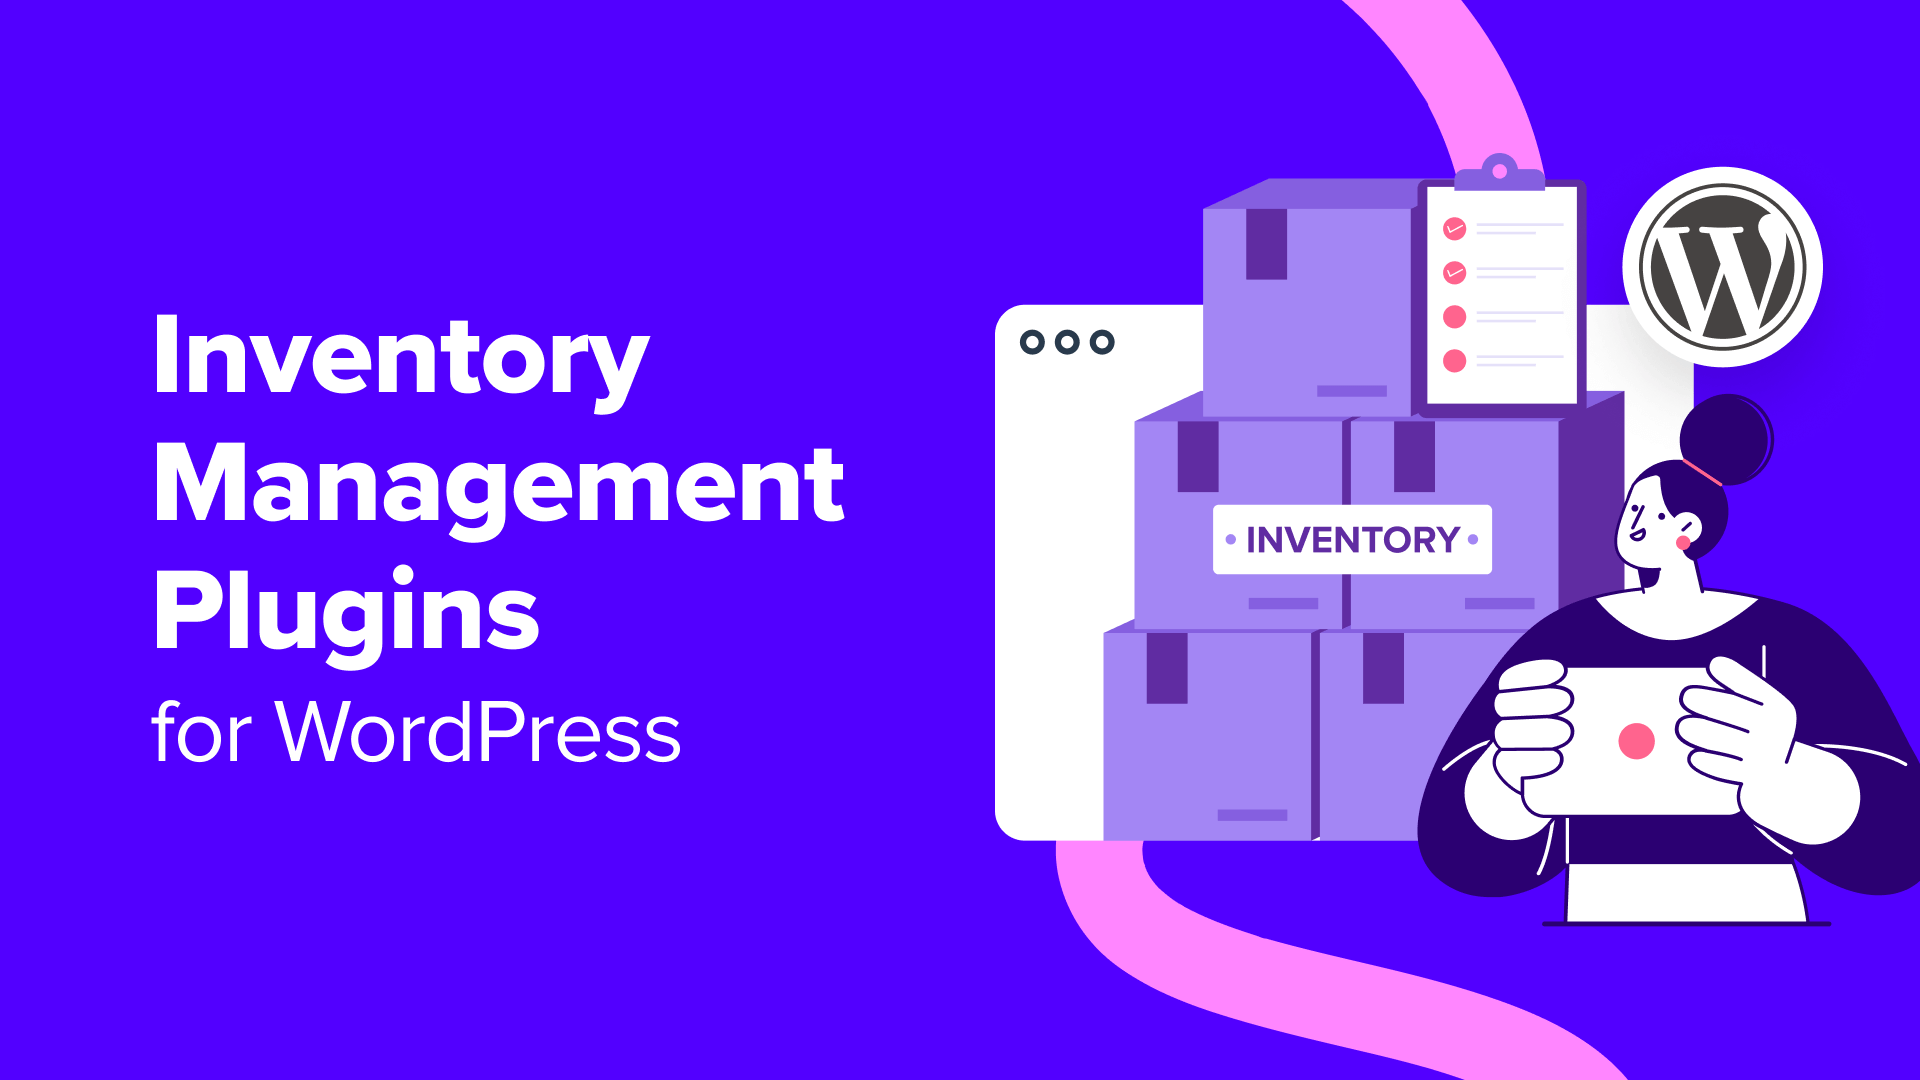 6 Best Inventory Management Plugins for WordPress (Compared)